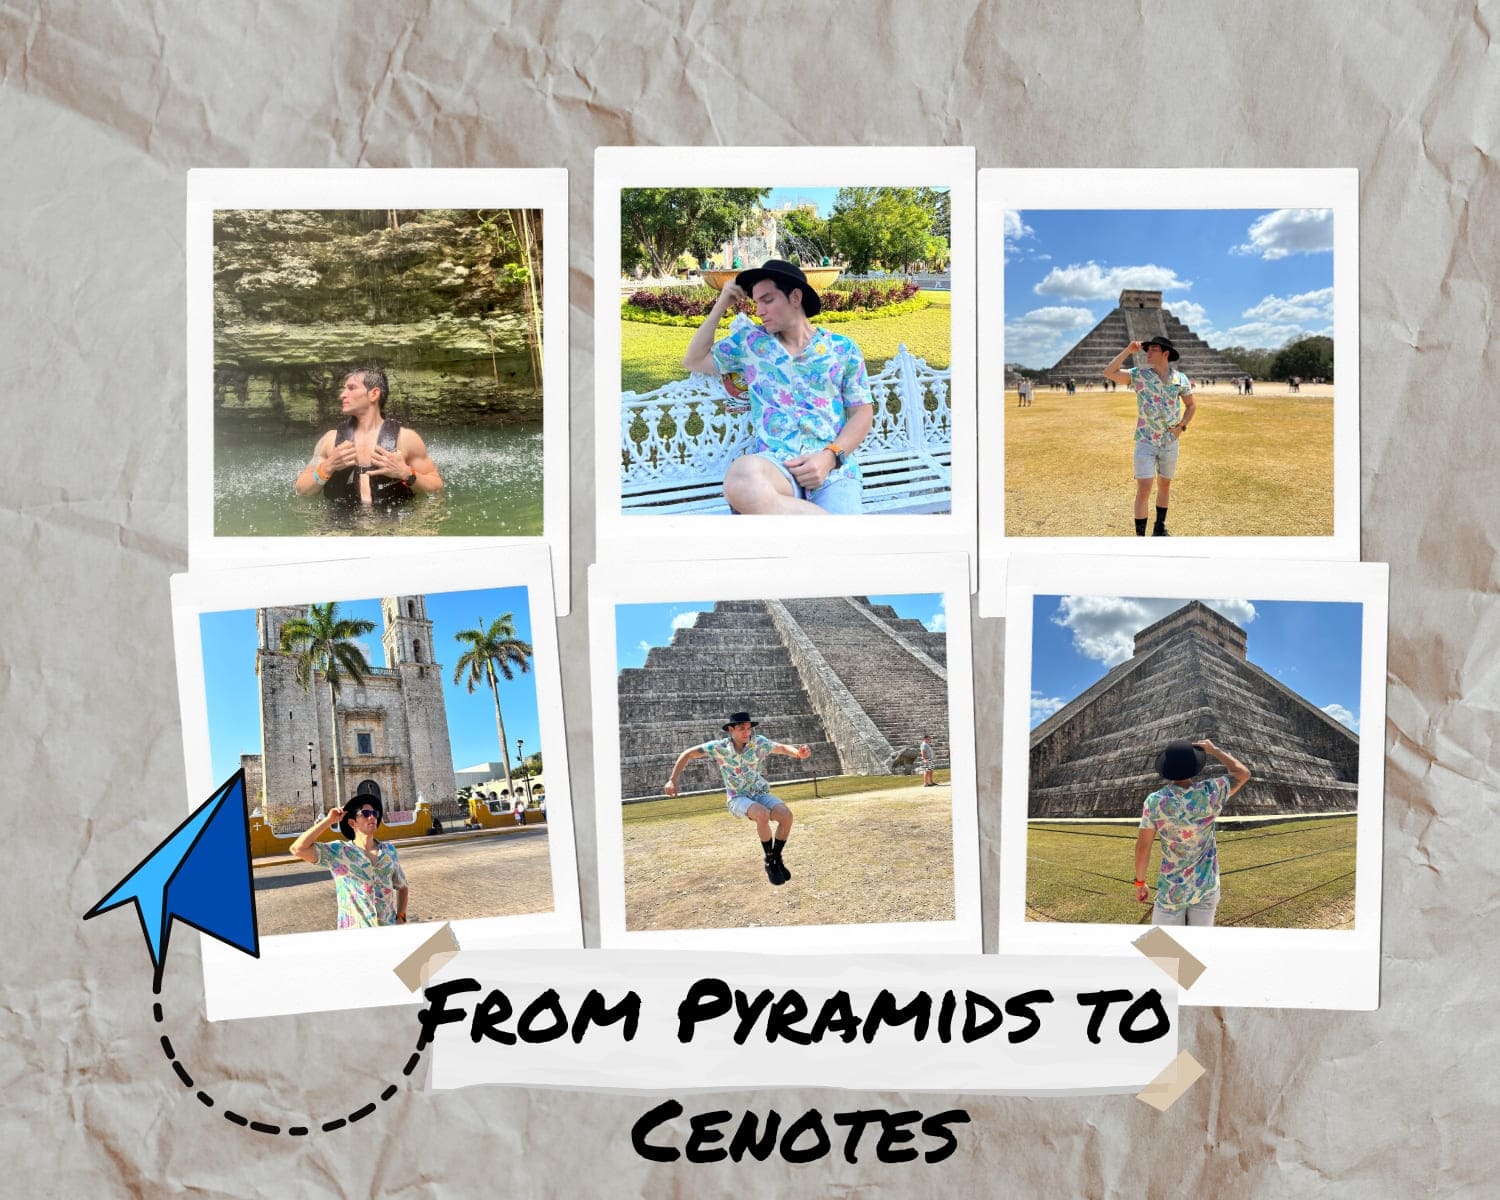 From Pyramids to Cenotes: An Epic Journey Through Yucatan's Rich Culture and History